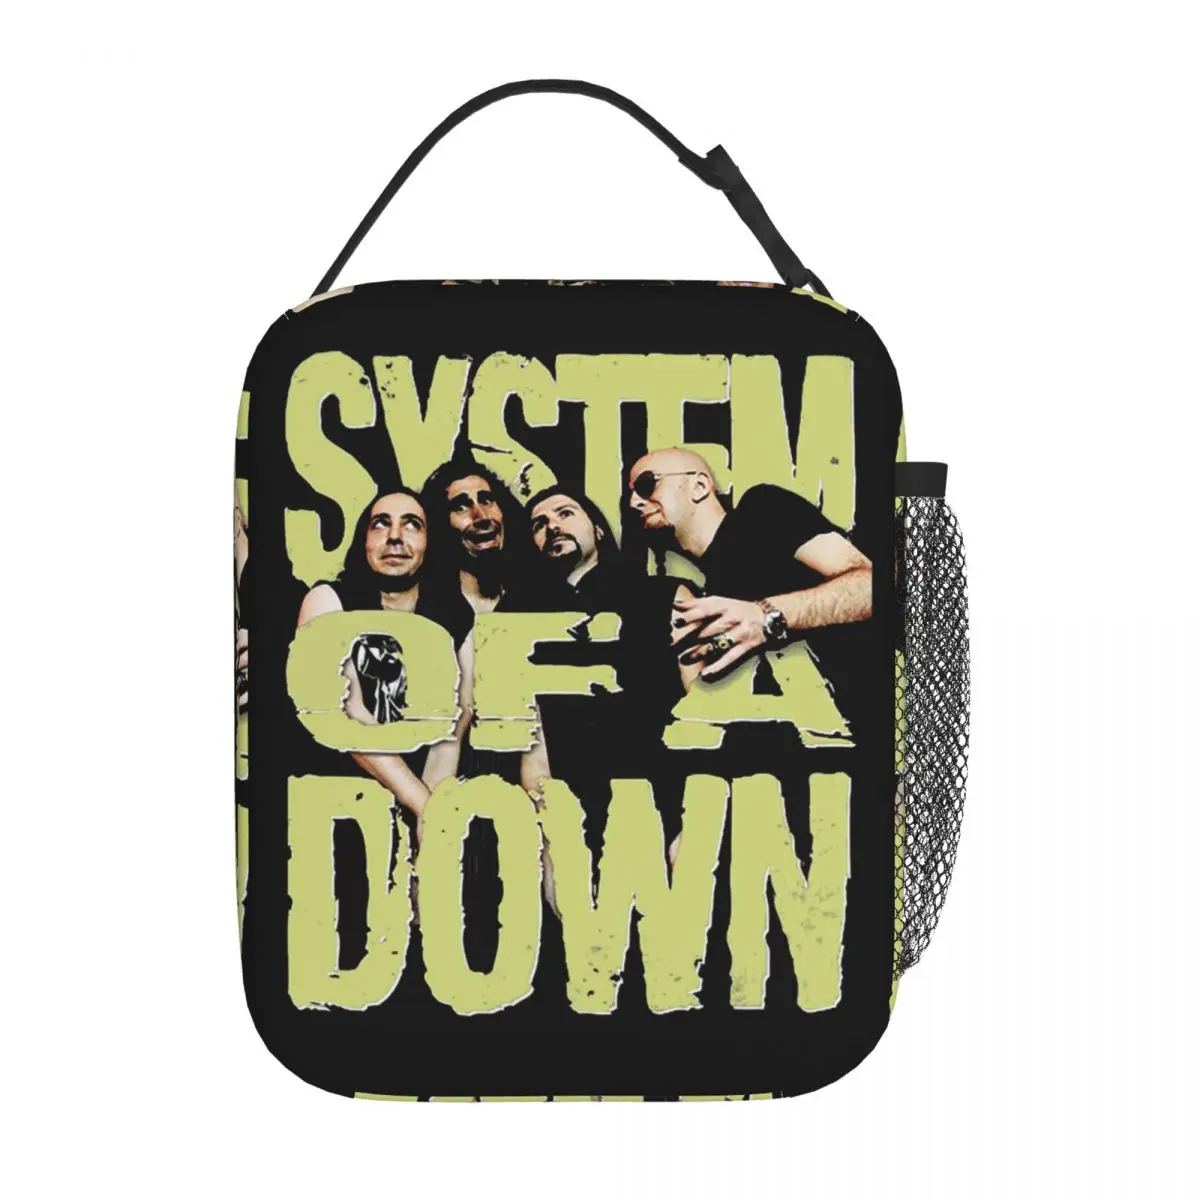 

System Of A Down Merch Insulated Lunch Tote Bag School SoaD Band Lunch Container Reusable Unique Design Thermal Cooler Bento Box